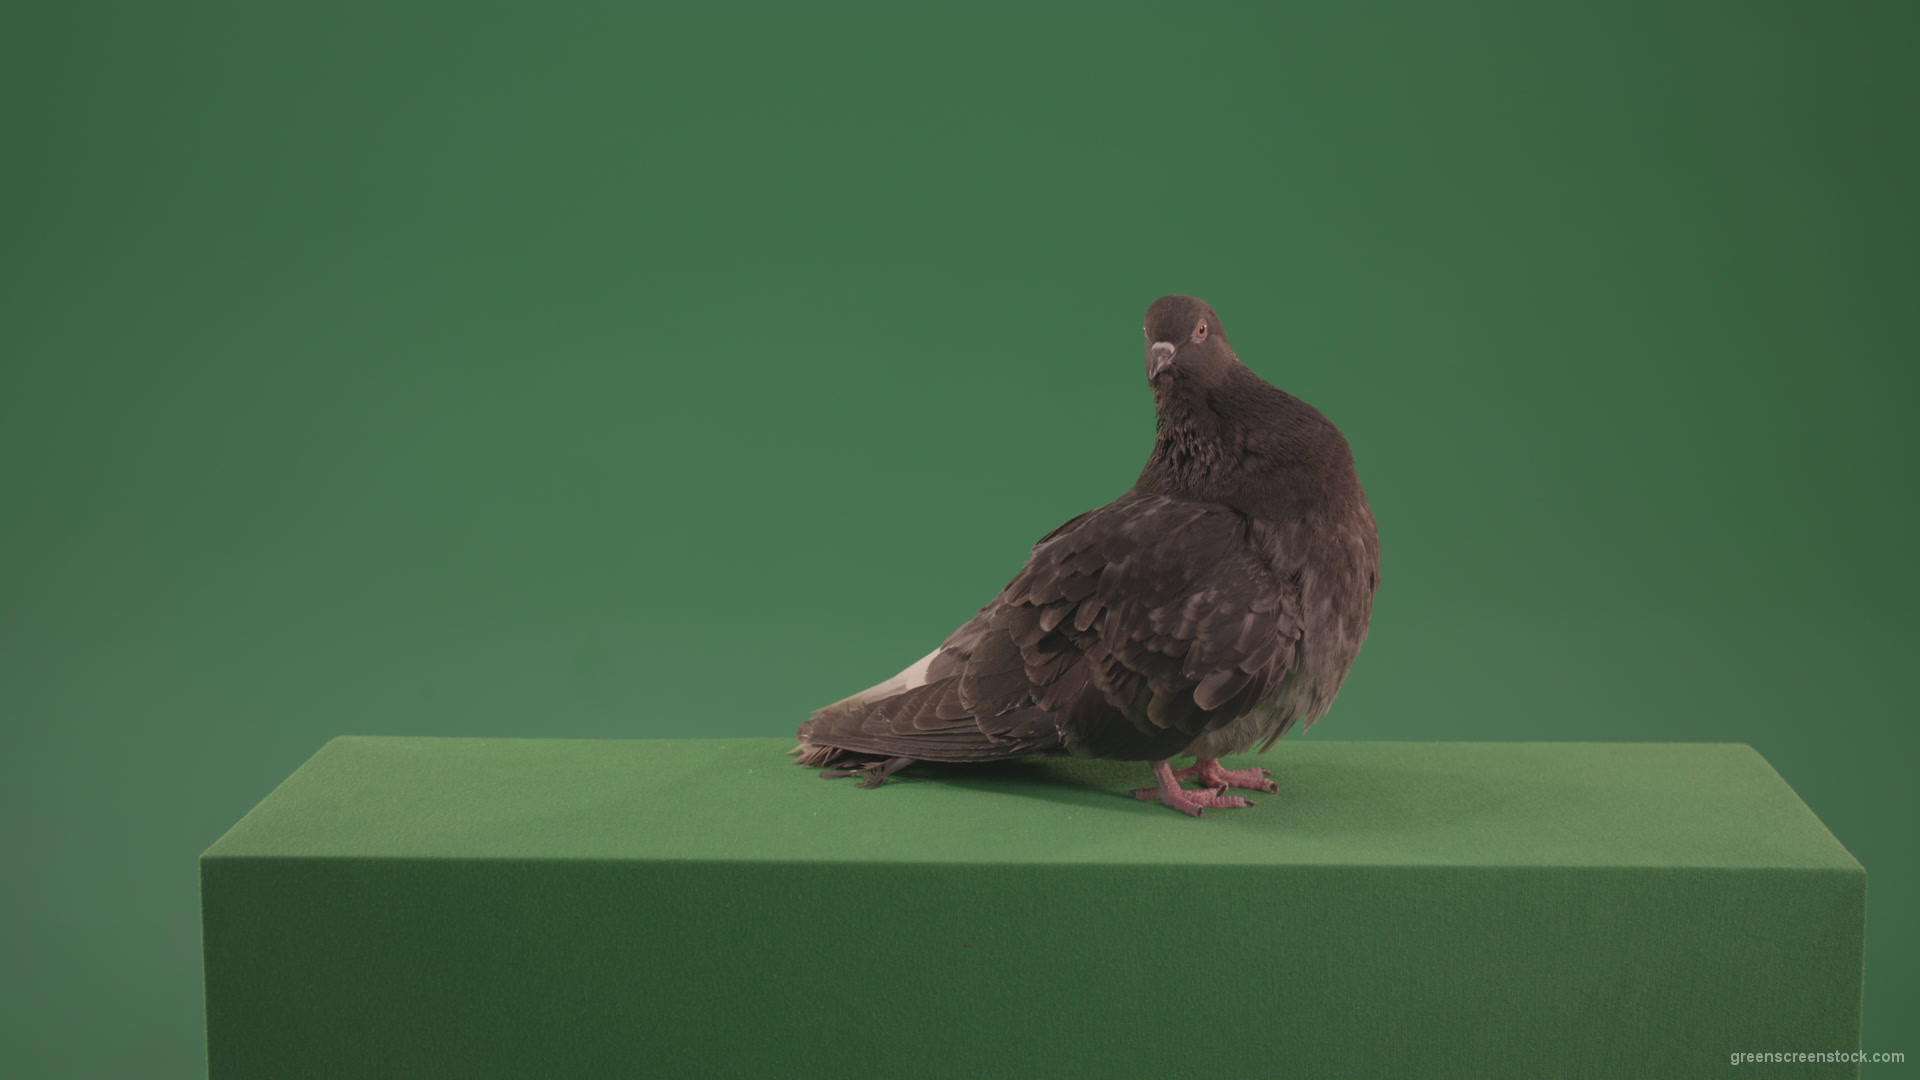 Bird-landed-and-inspected-the-territory-isolated-on-chromakey-background_004 Green Screen Stock